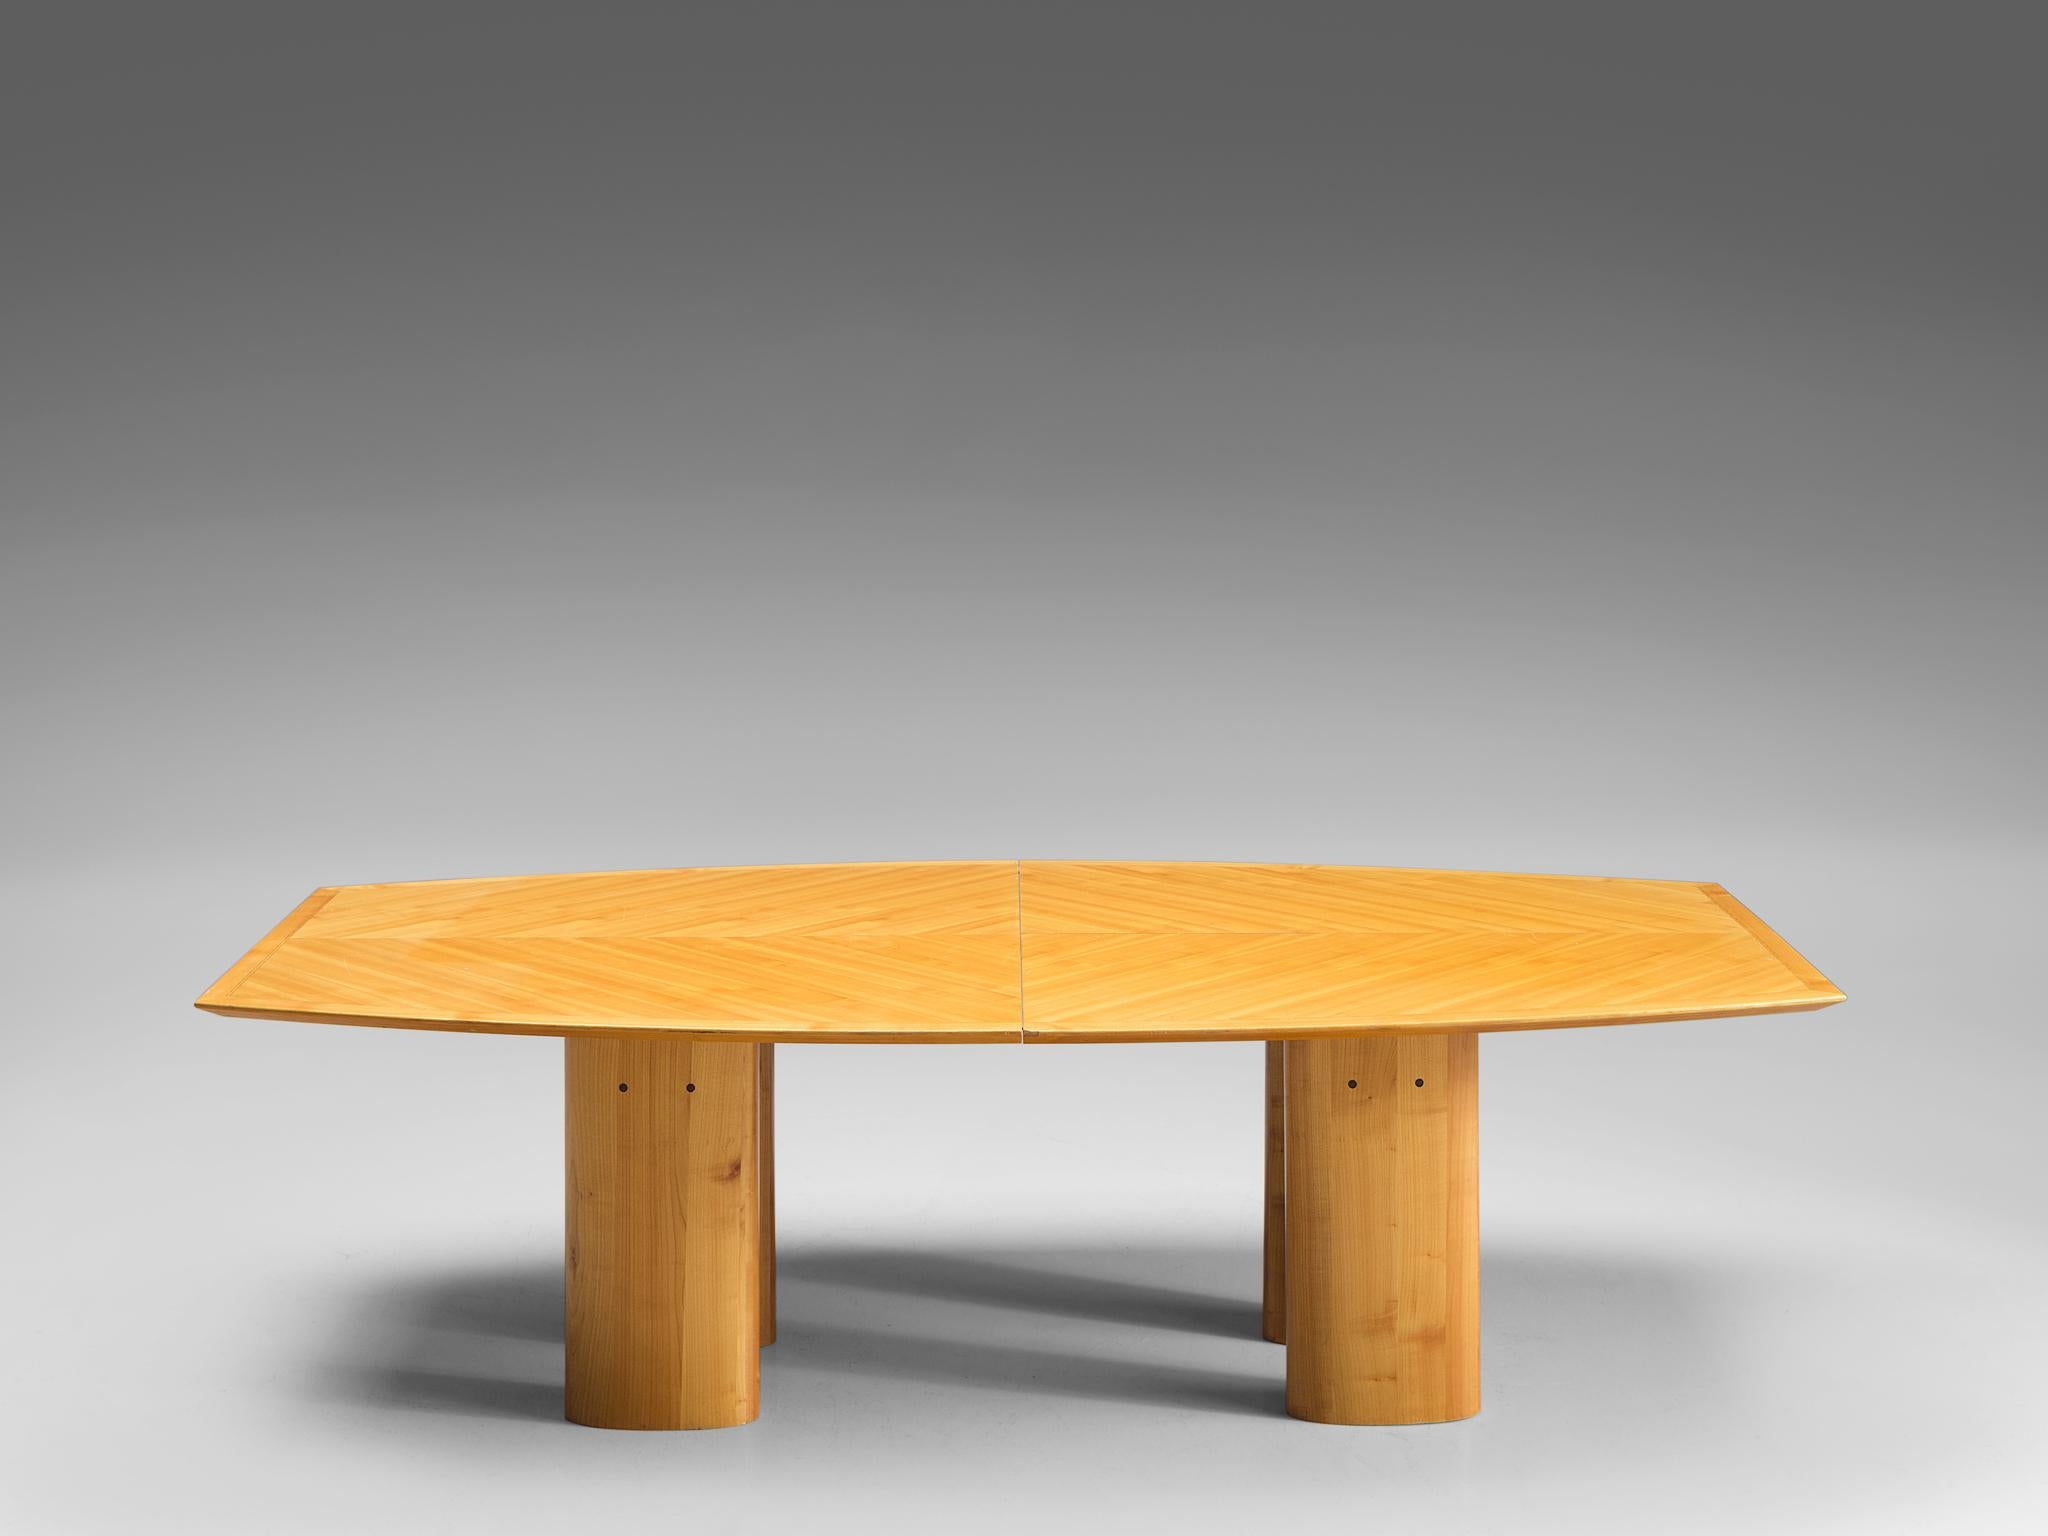 Italian dining table, beech, Italy, 1970s

This sculptural table not only features four oval legs but also a boat shaped top. The top is highlighted with beautiful beech grains and actually constists out of two similar parts. The bright and warm